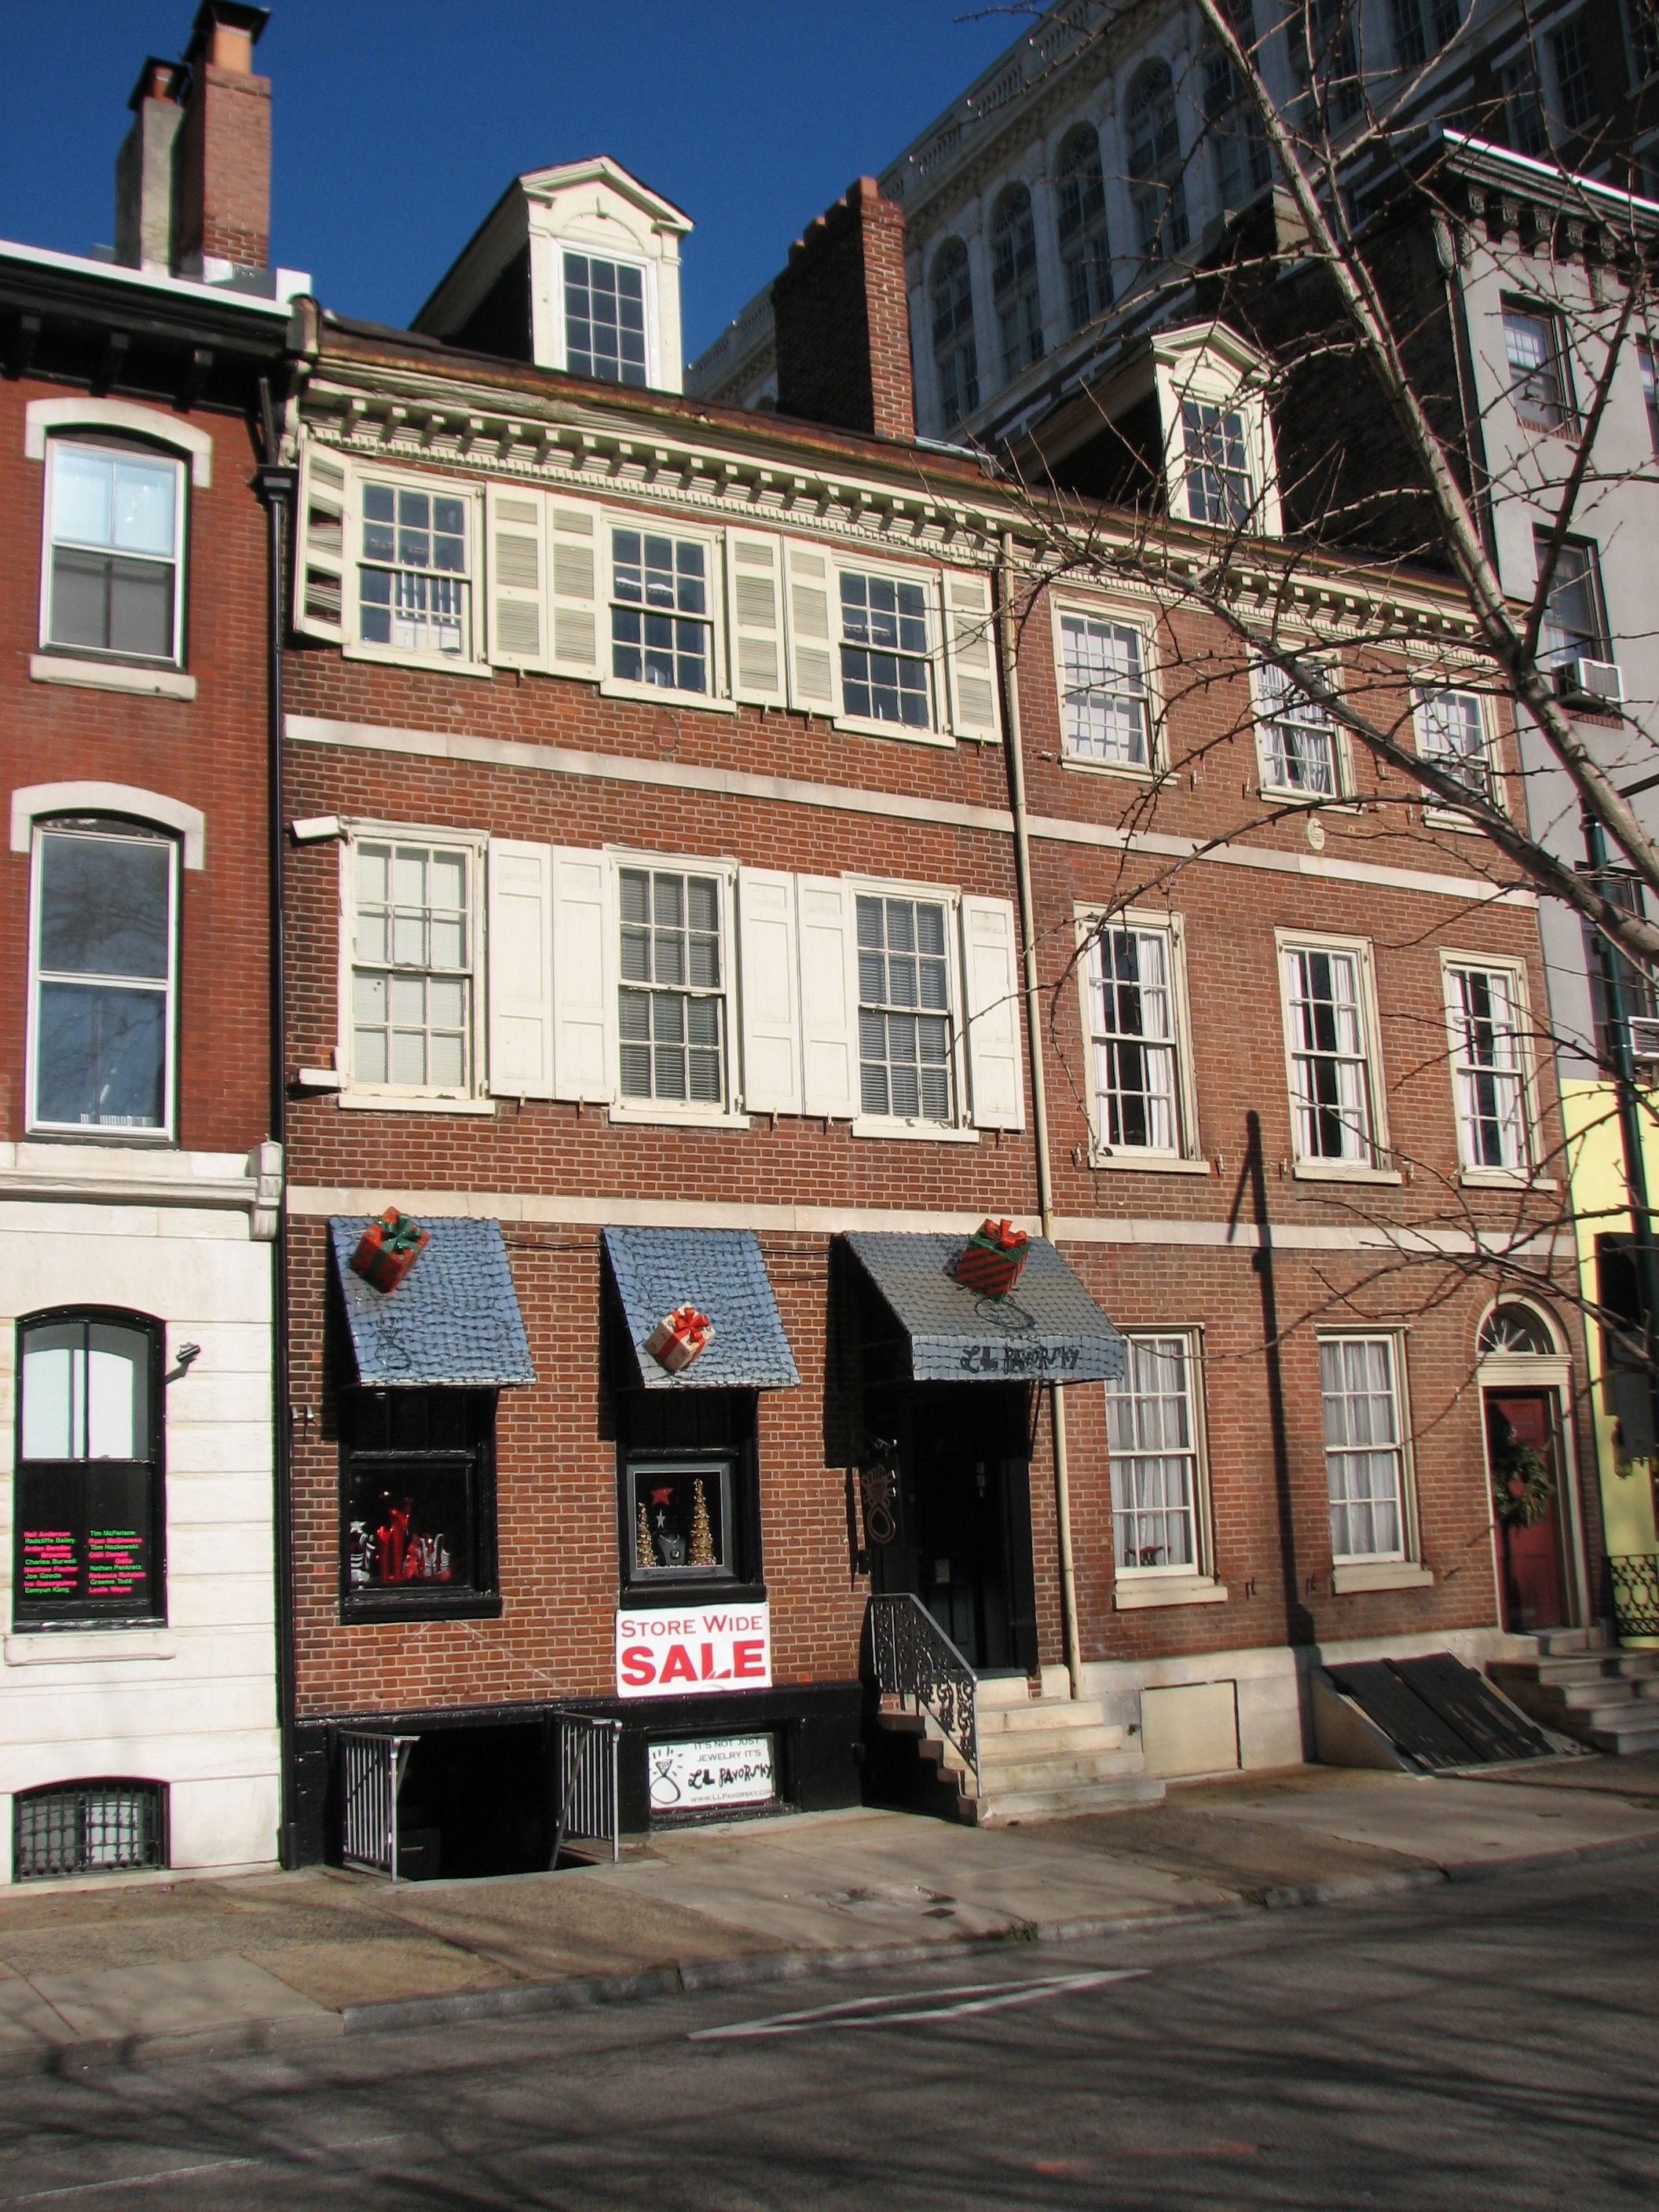 The upper floors of 705 and 707 Walnut retain the original 1799 features.